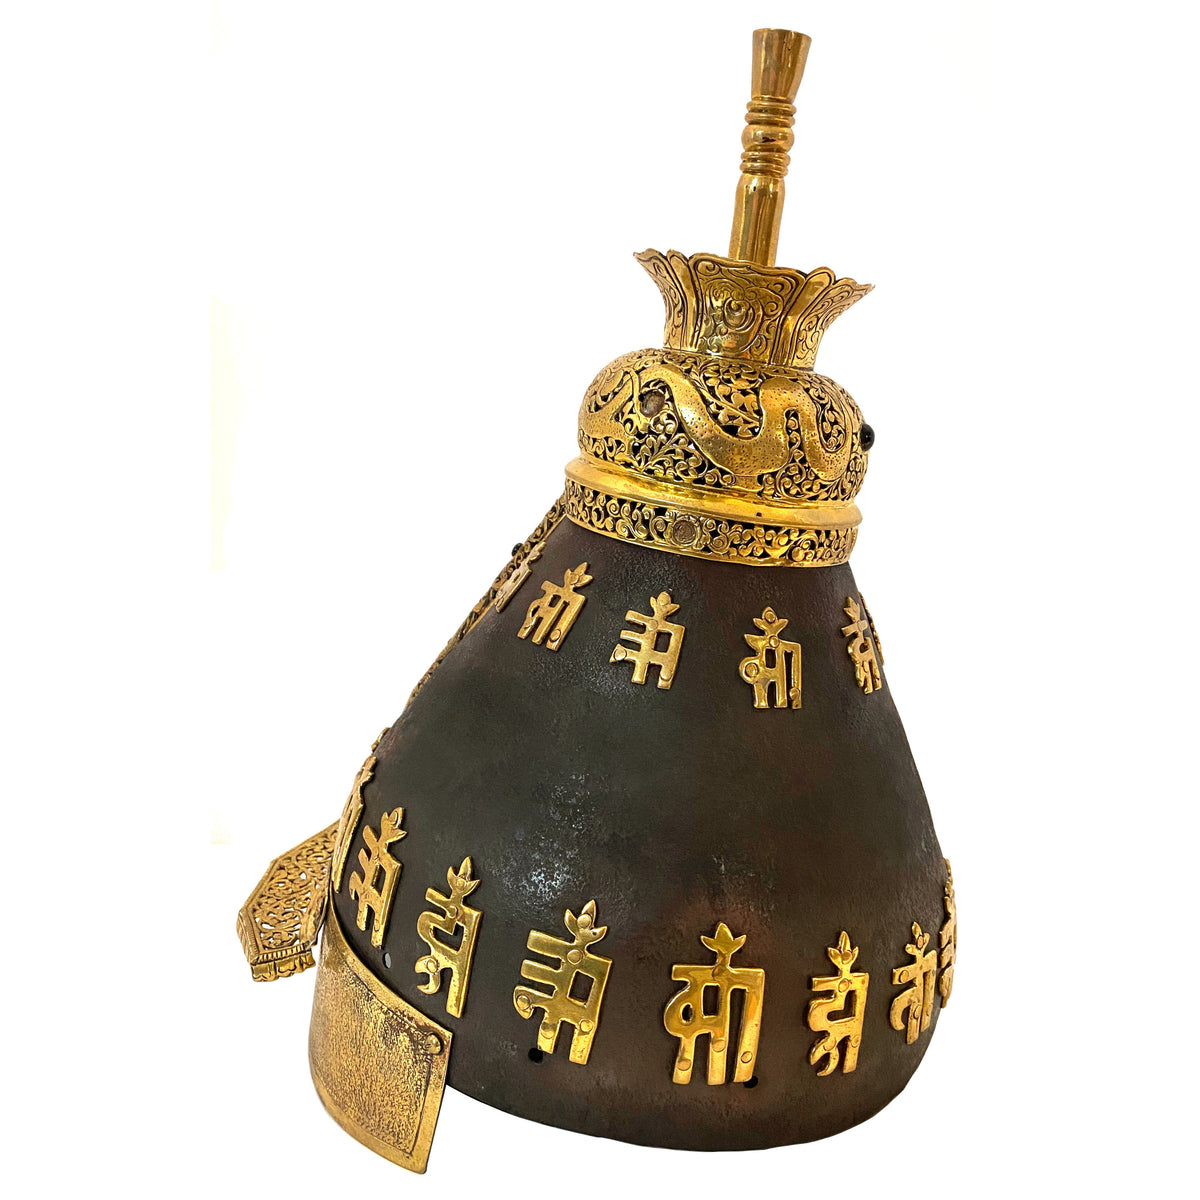 Antique 18th Century Imperial Qing Dynasty Parcel Gilt Iron Chinese Helmet, circa 1750